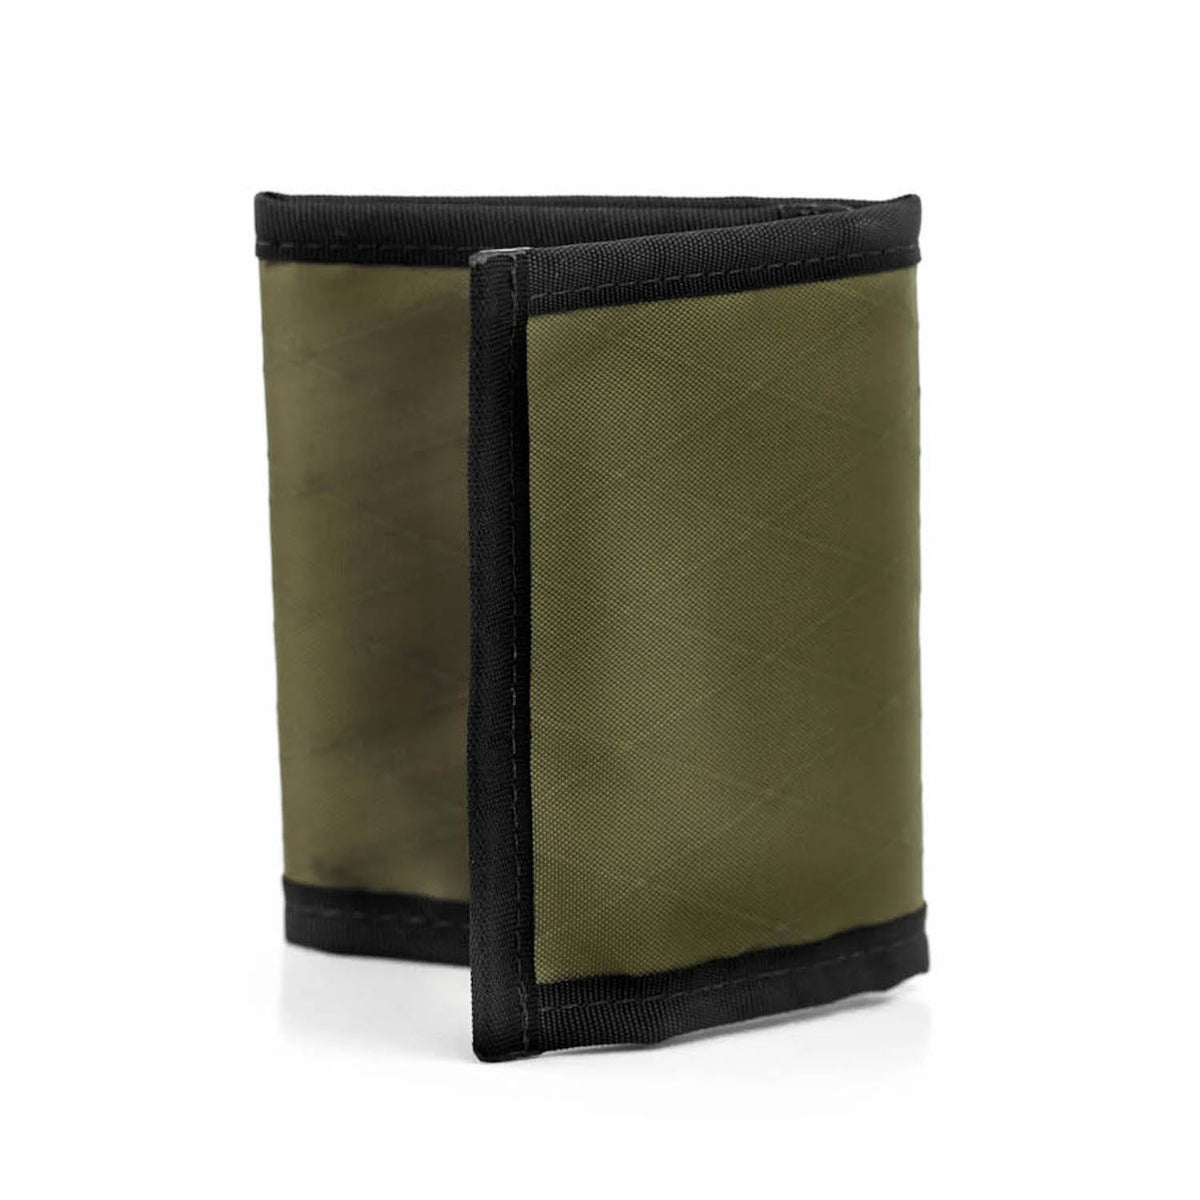 Flowfold Olive Green Lightweight Outdoor Materials Wallet with Black Trim on a White Background, designed as a thin trifold Traveler Wallet.